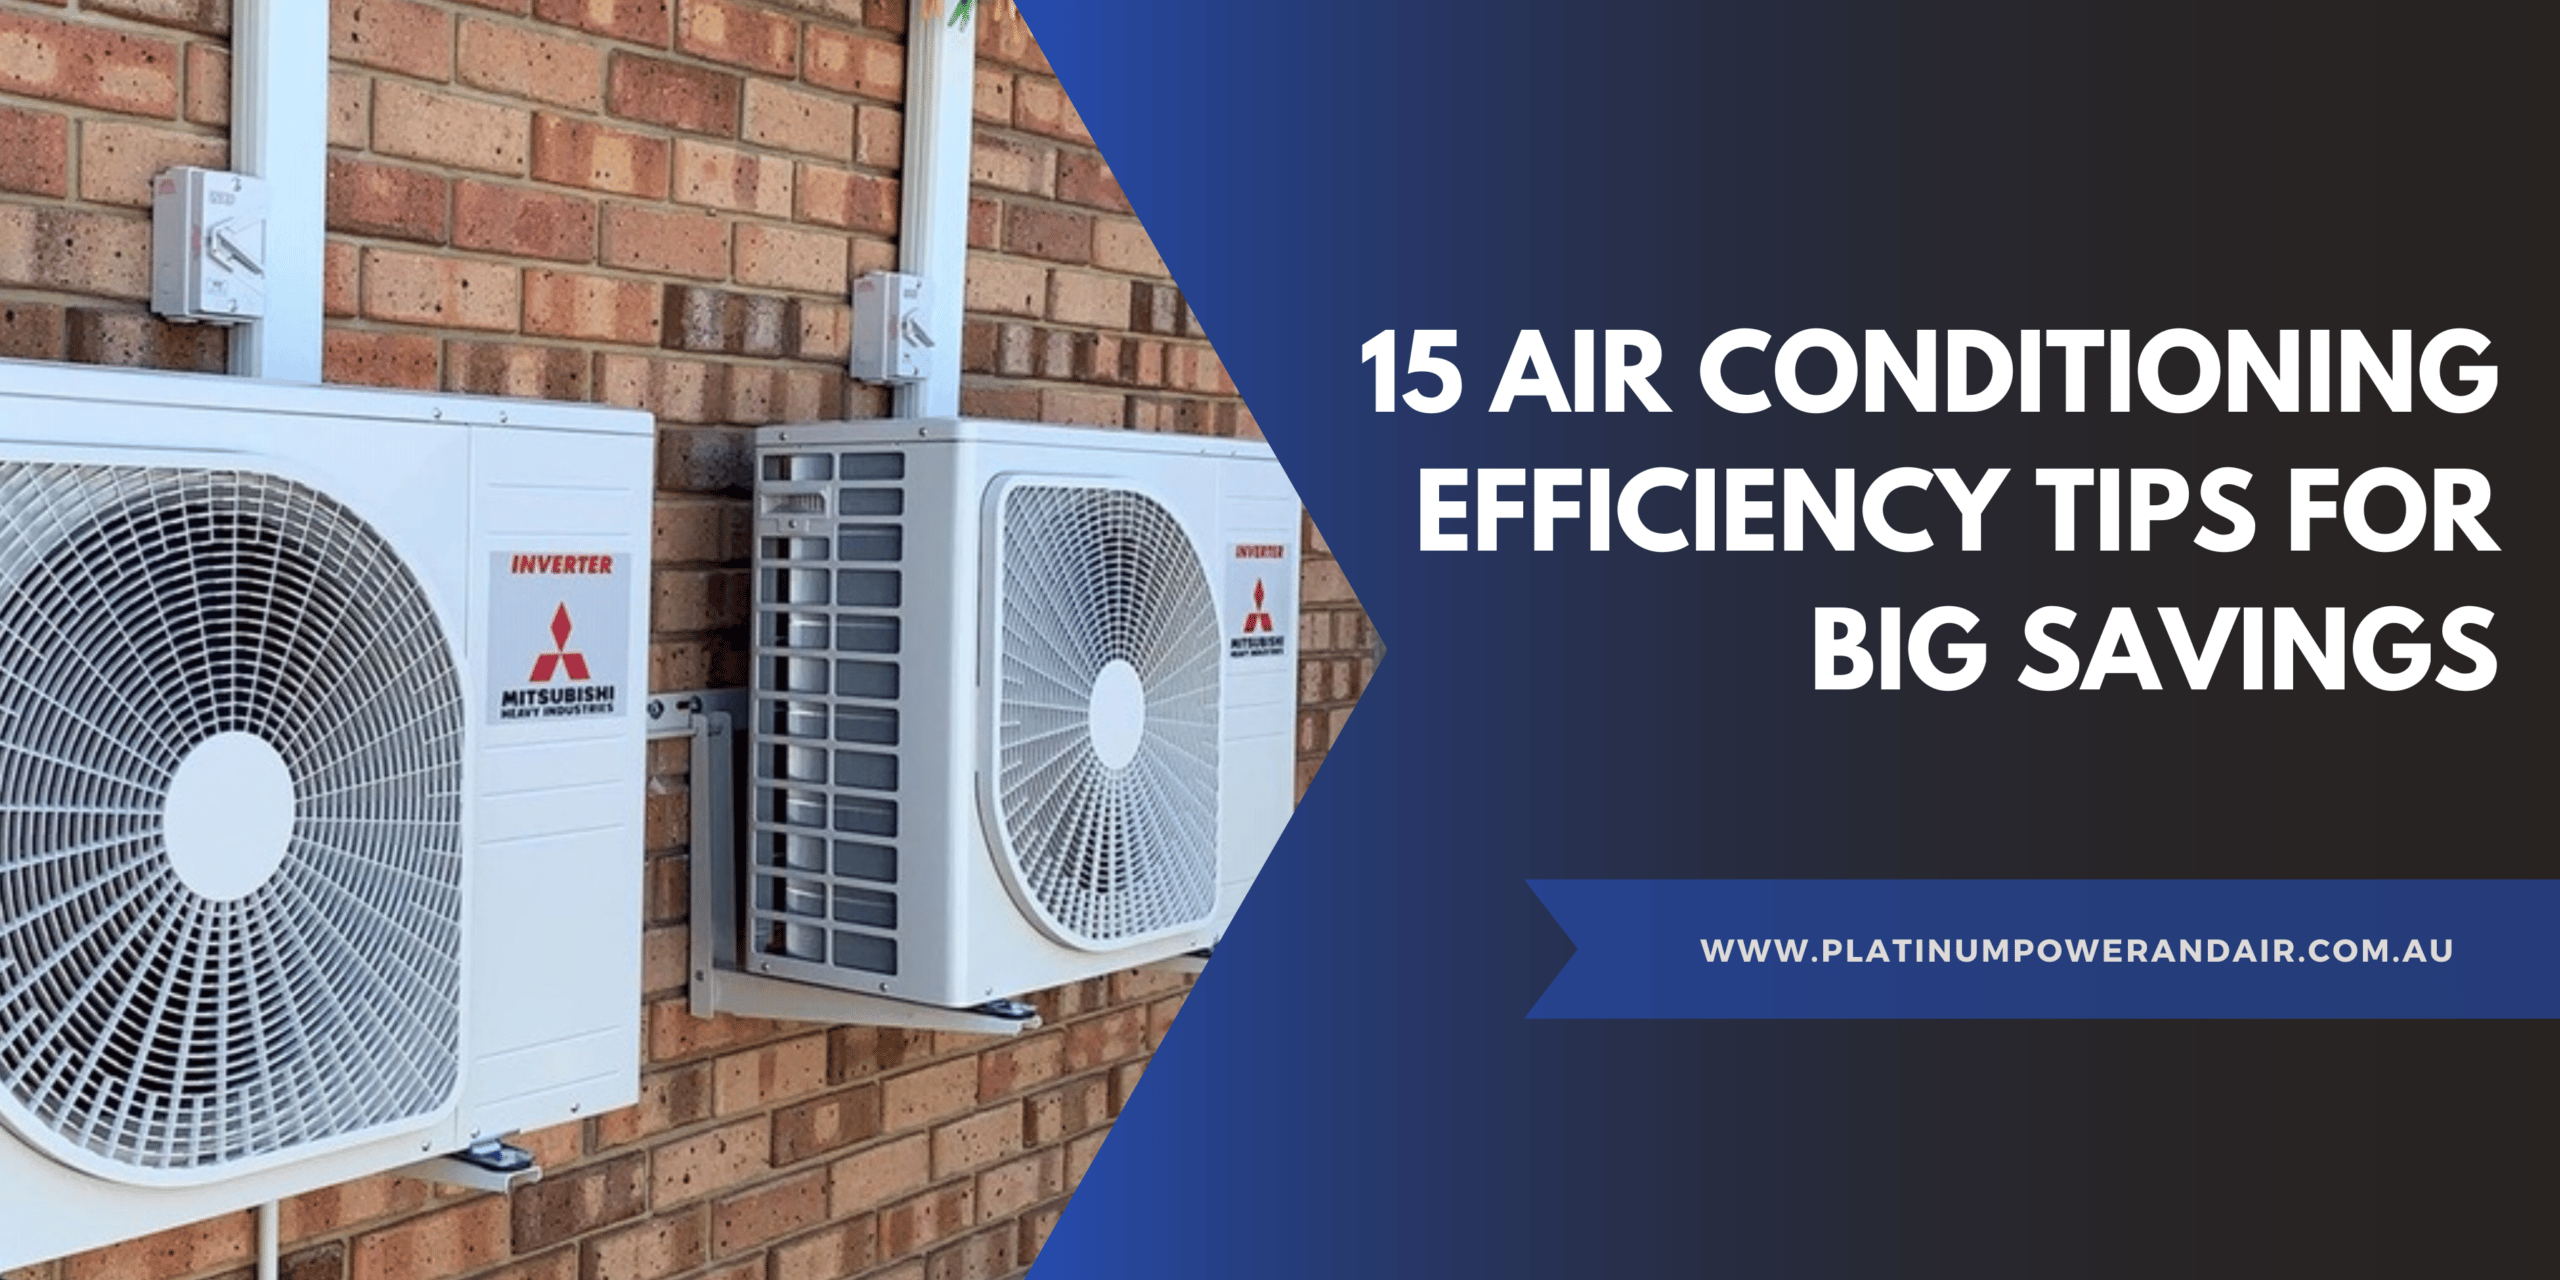 15 Air Conditioning Efficiency Tips